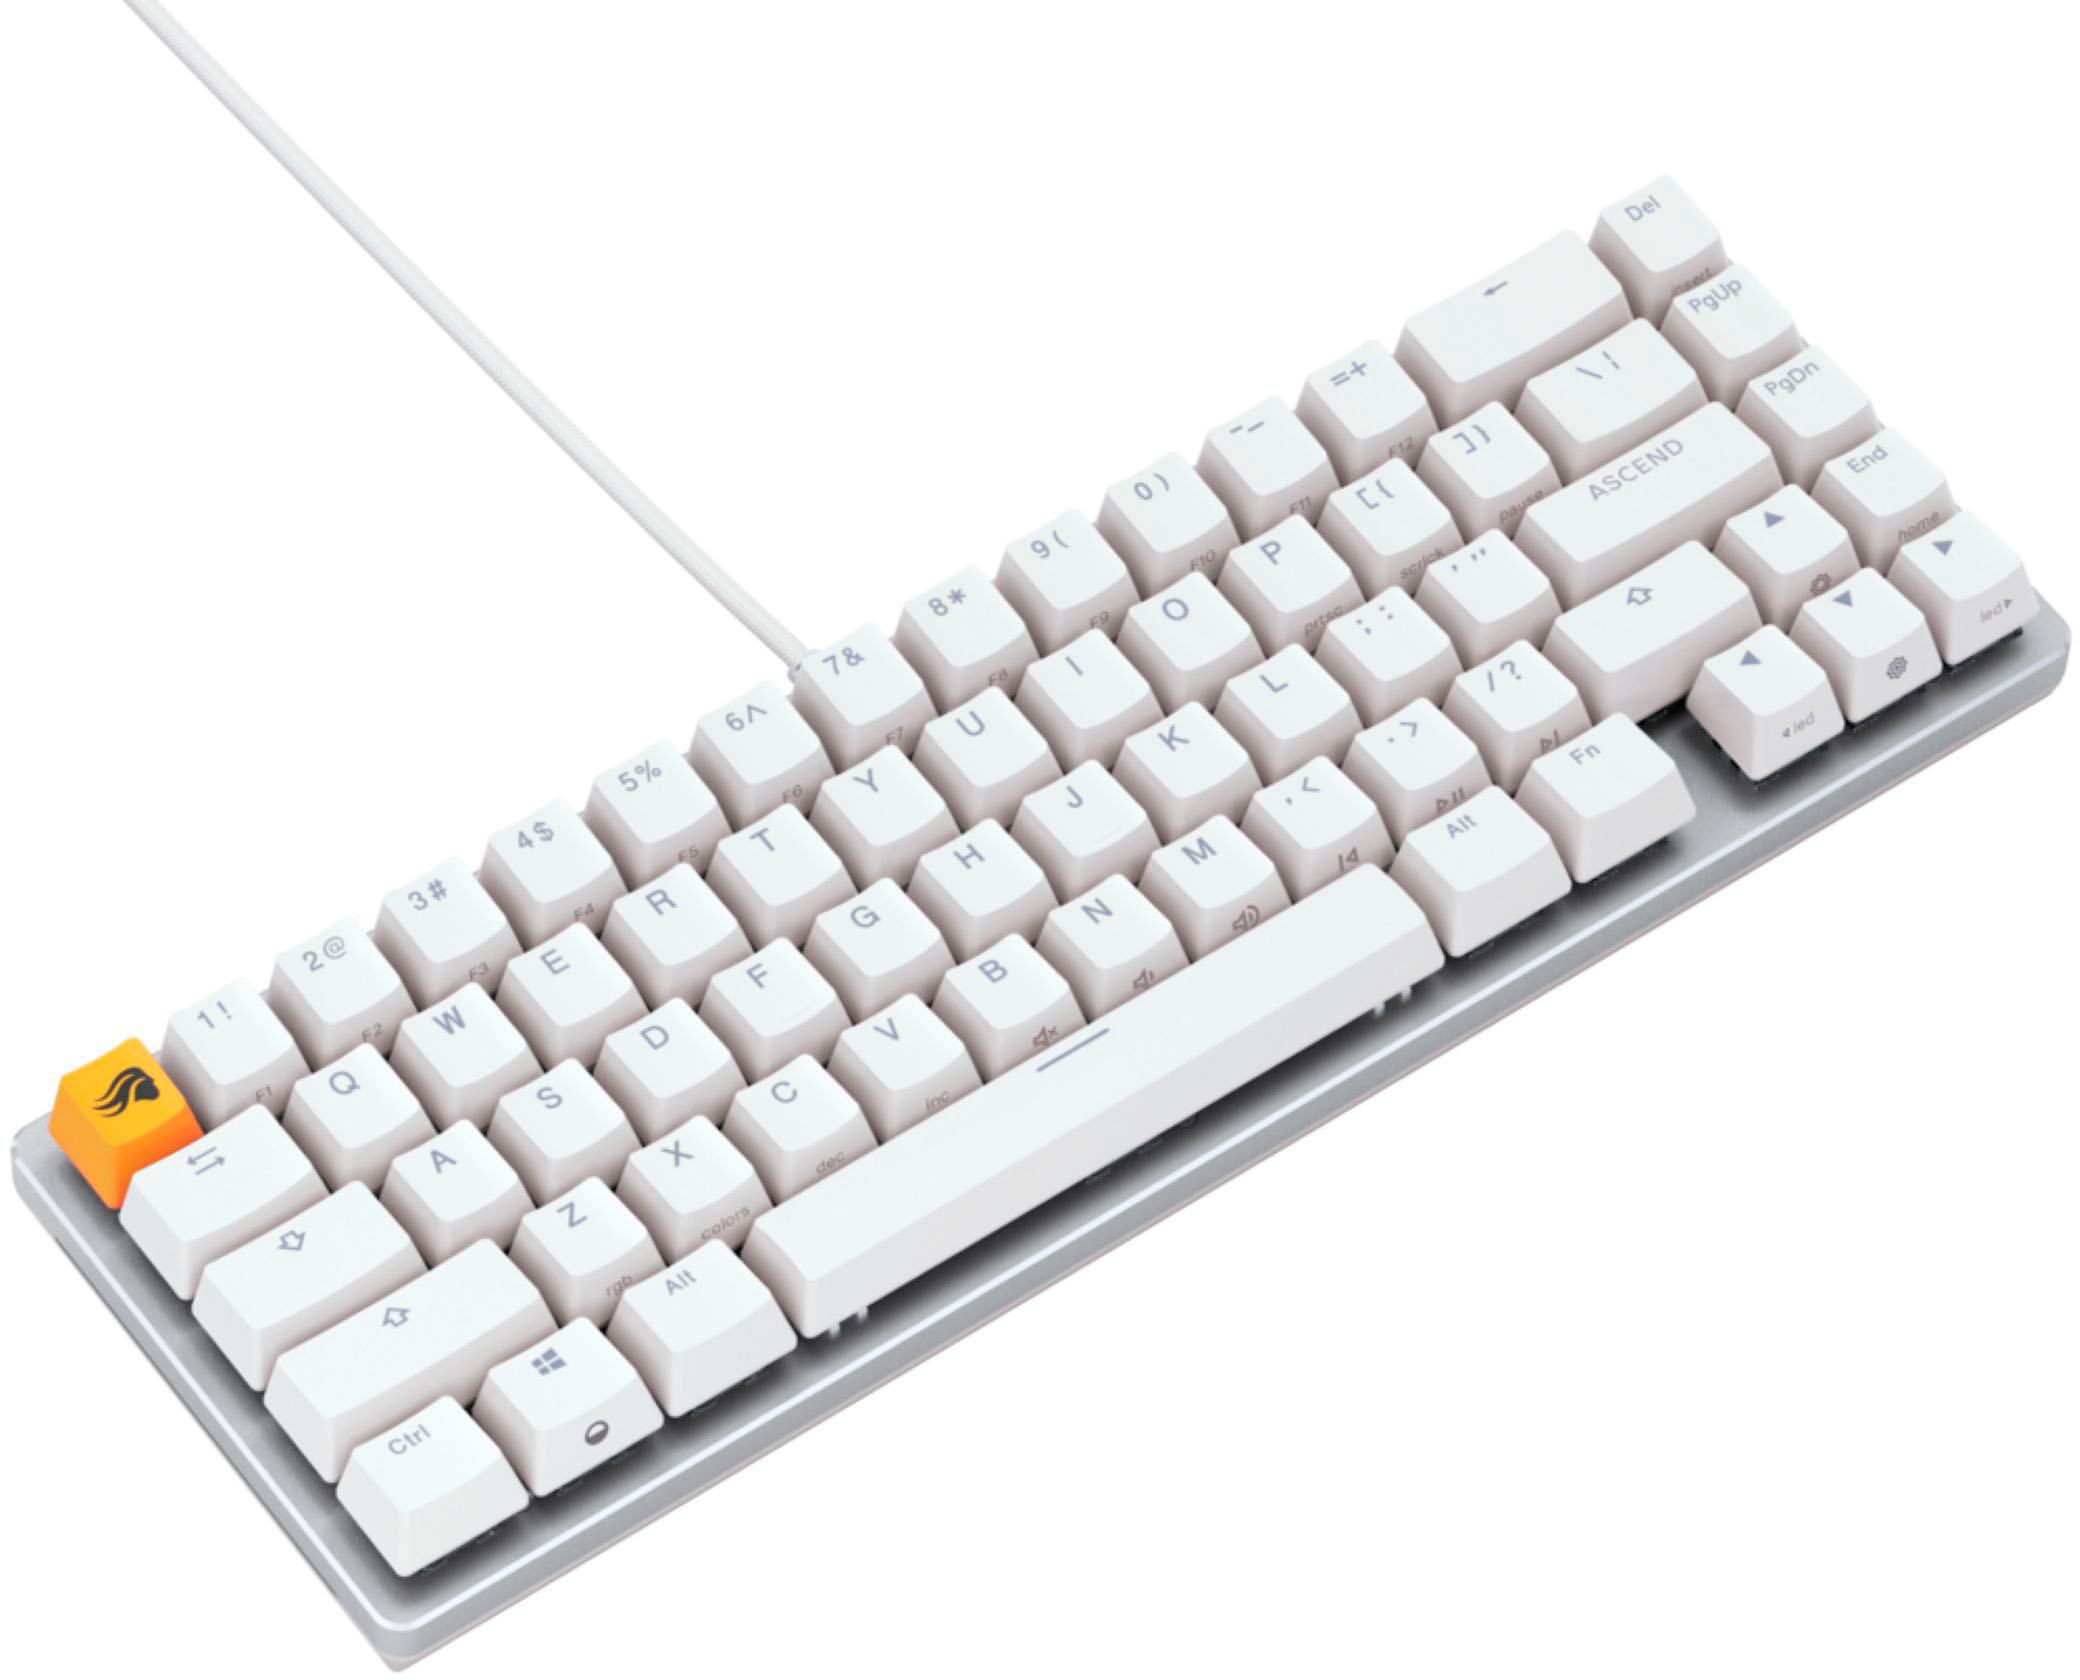 Angle View: Adesso - SlimTouch AKB-232UB Full-size Wired Membrane Keyboard - Black